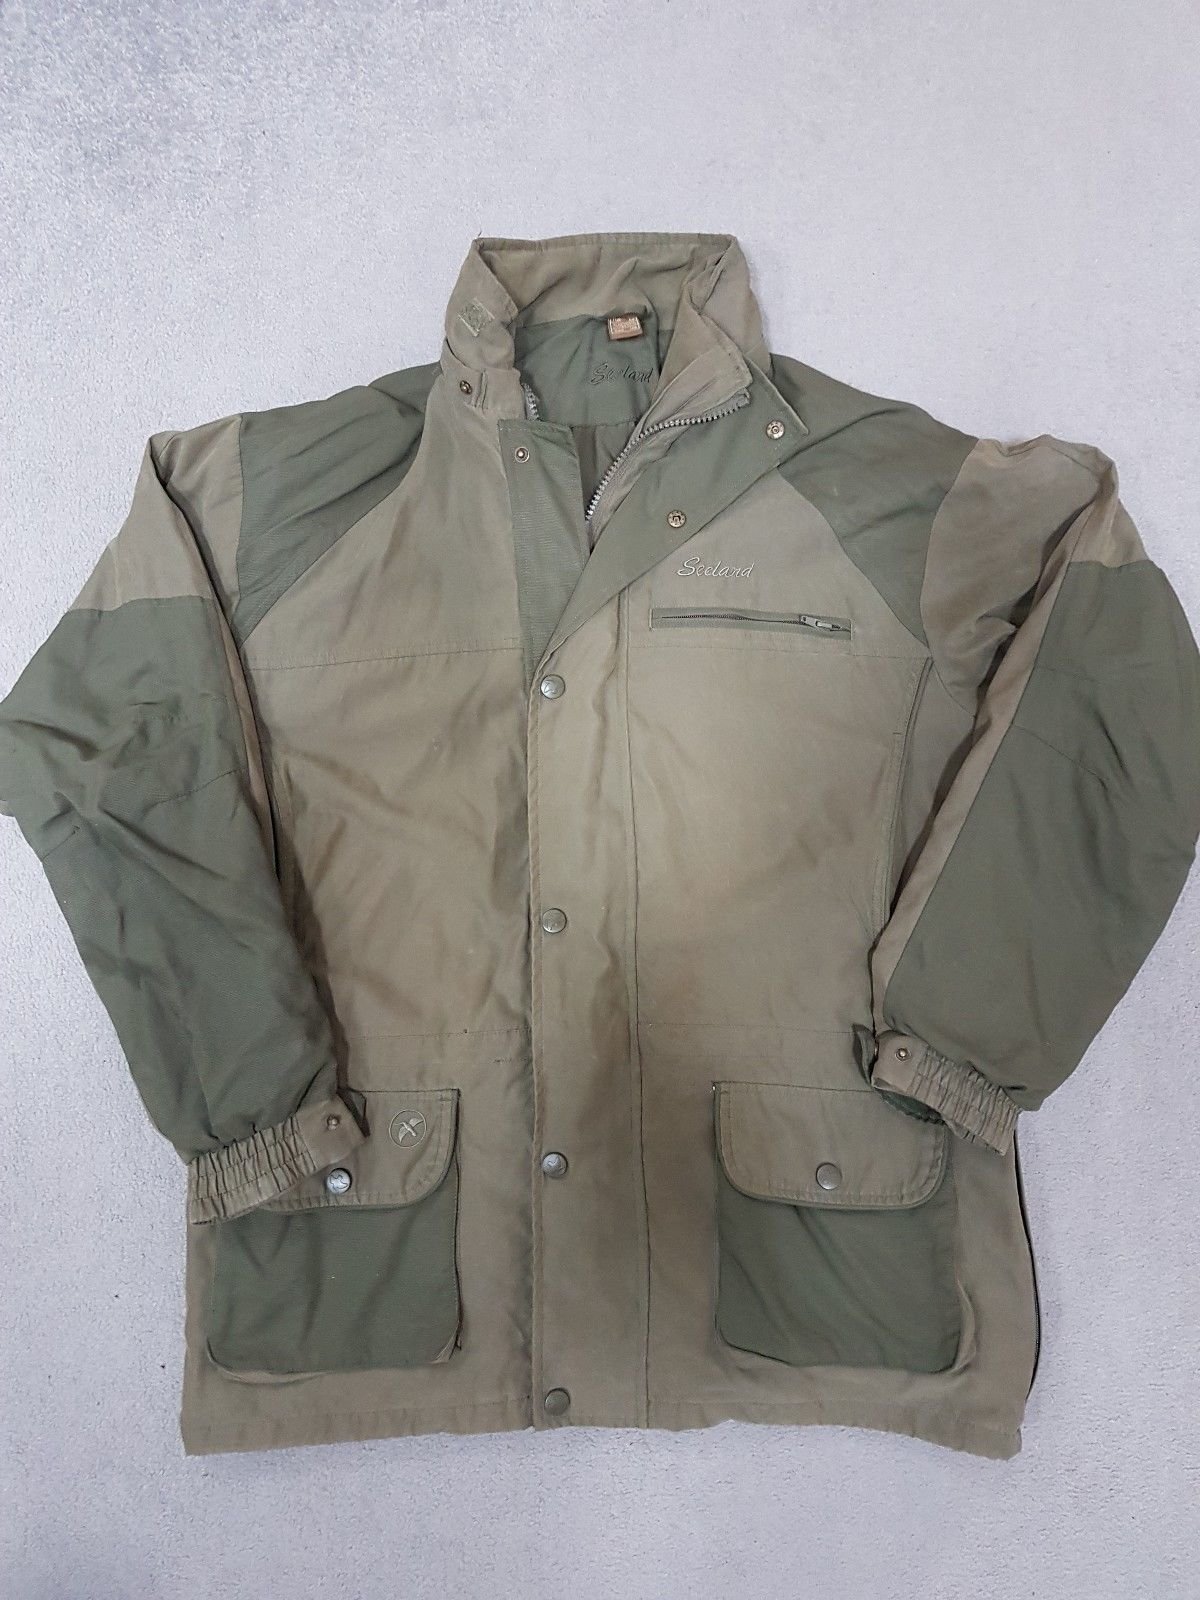 Seeland country/shooting jacket